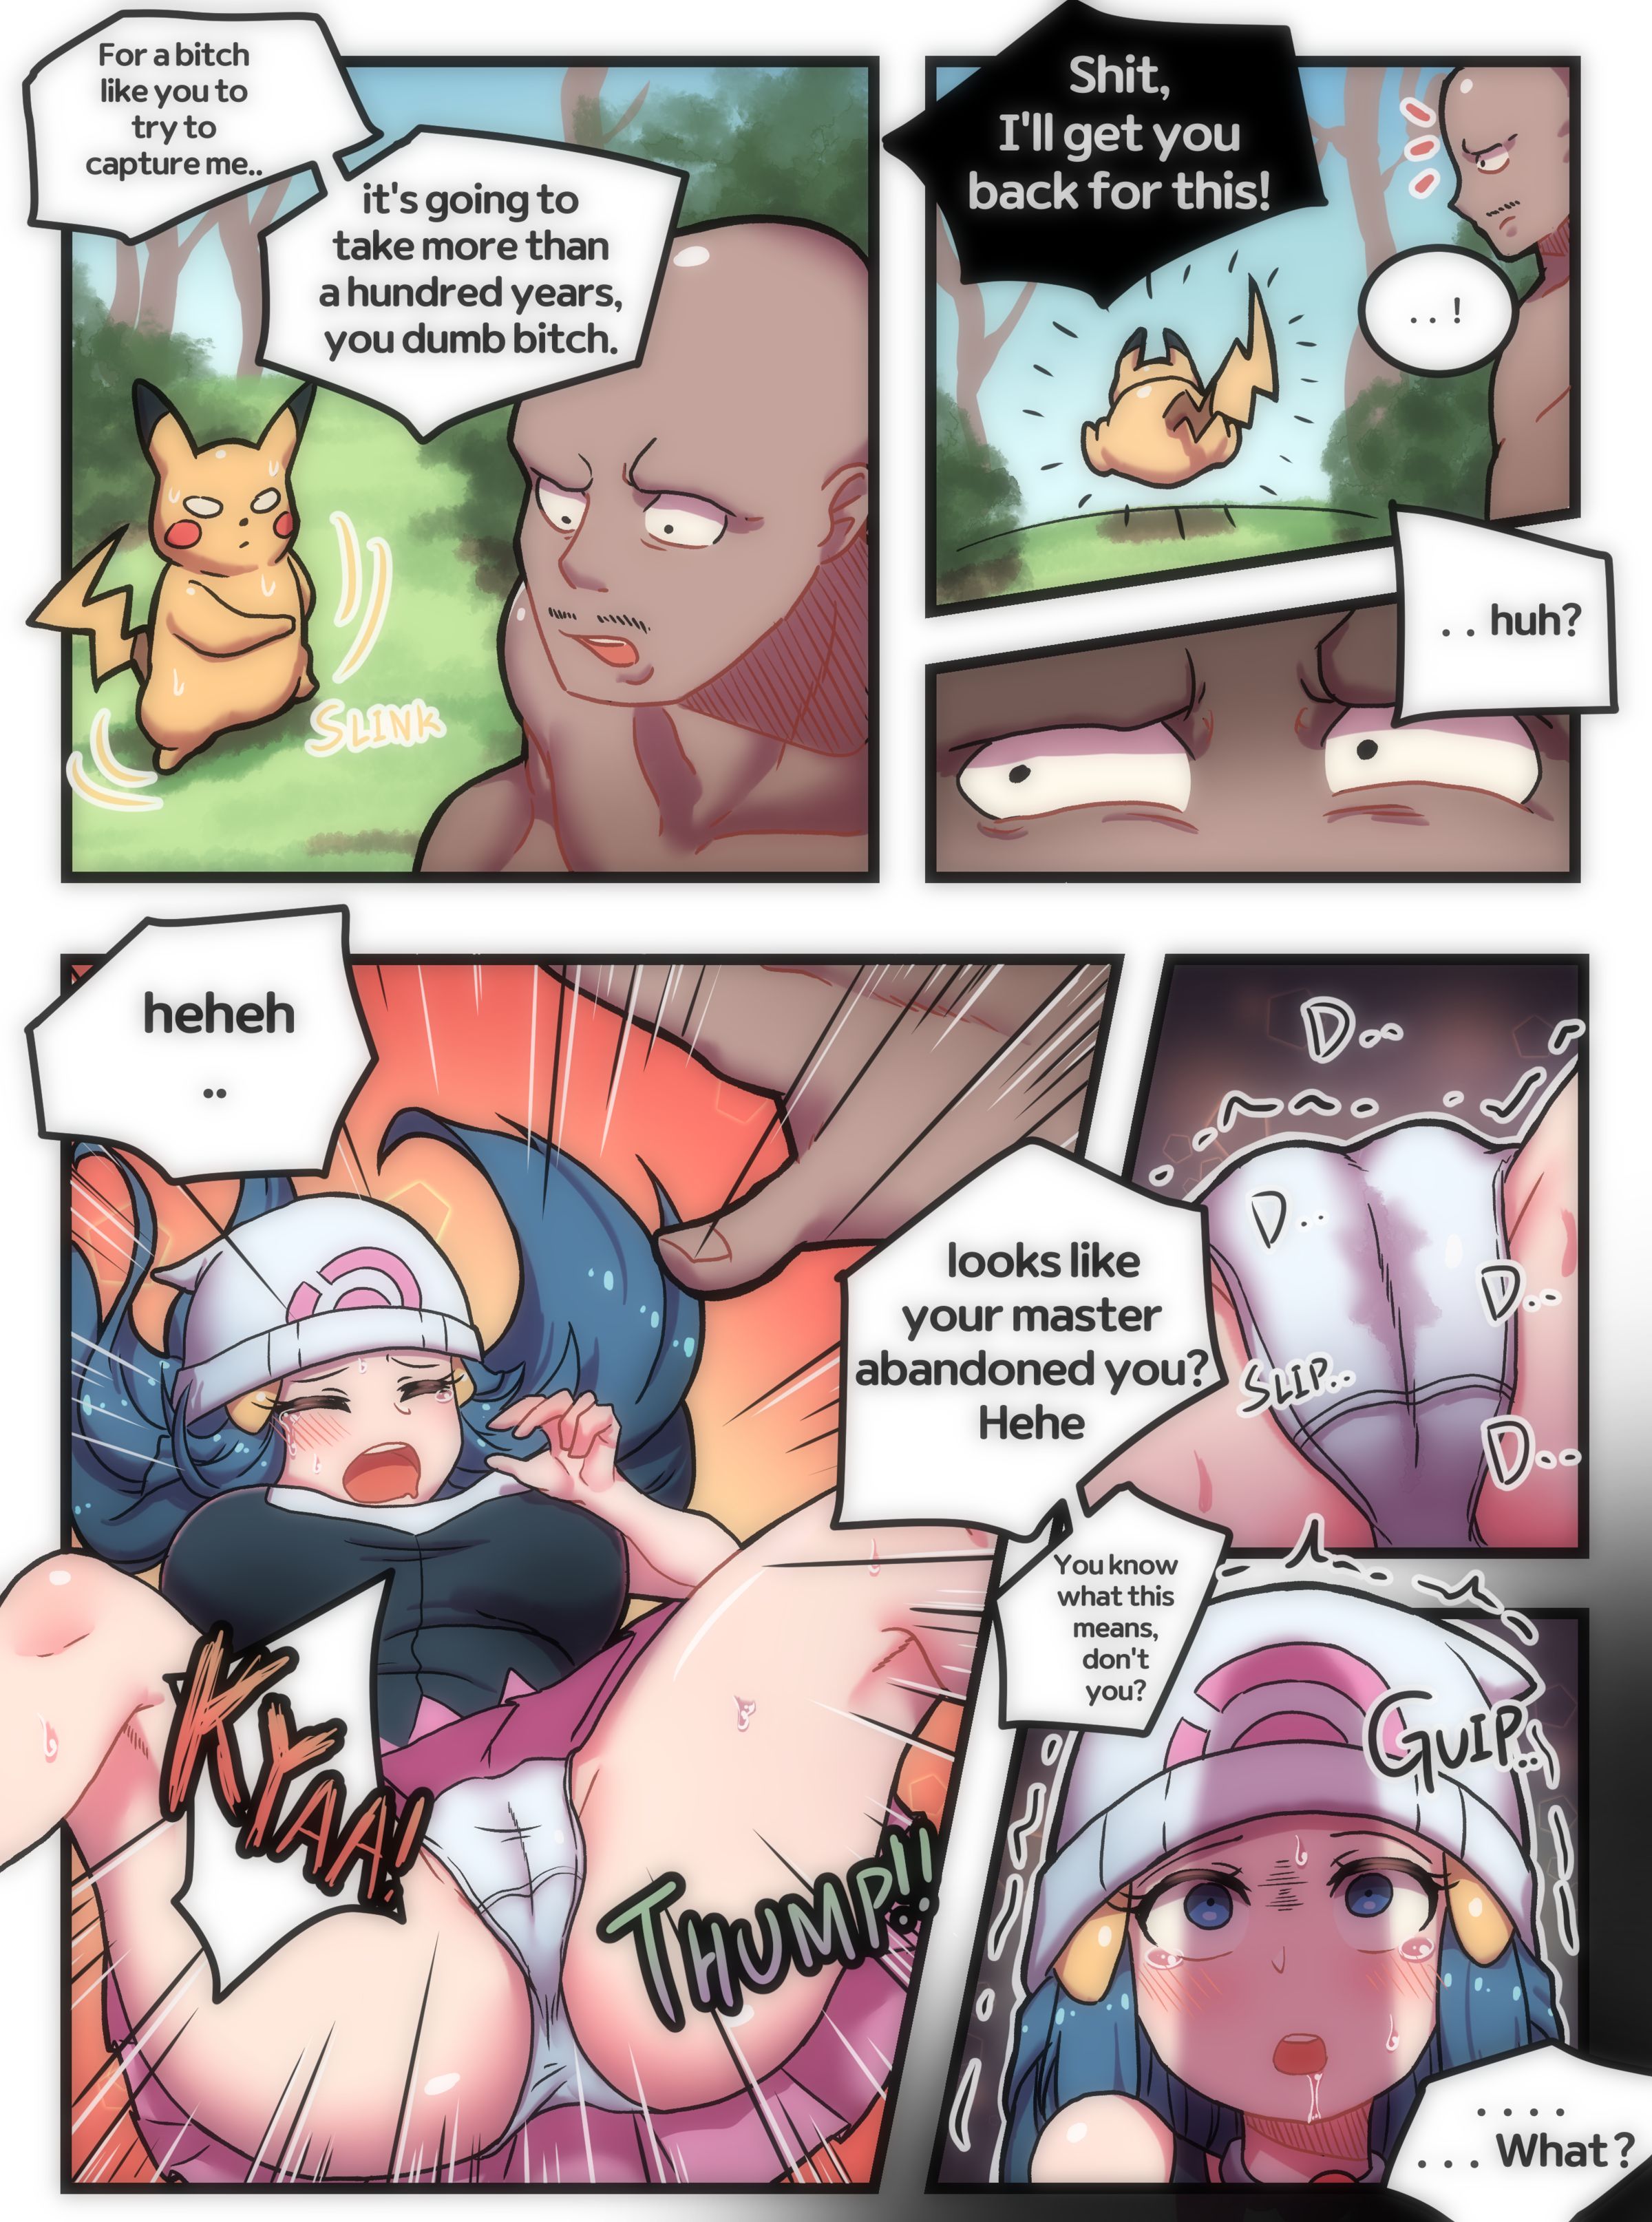 Pokemon World! - Pokemon girl loses a battle and gets a big dick creampie instead - sex comics image